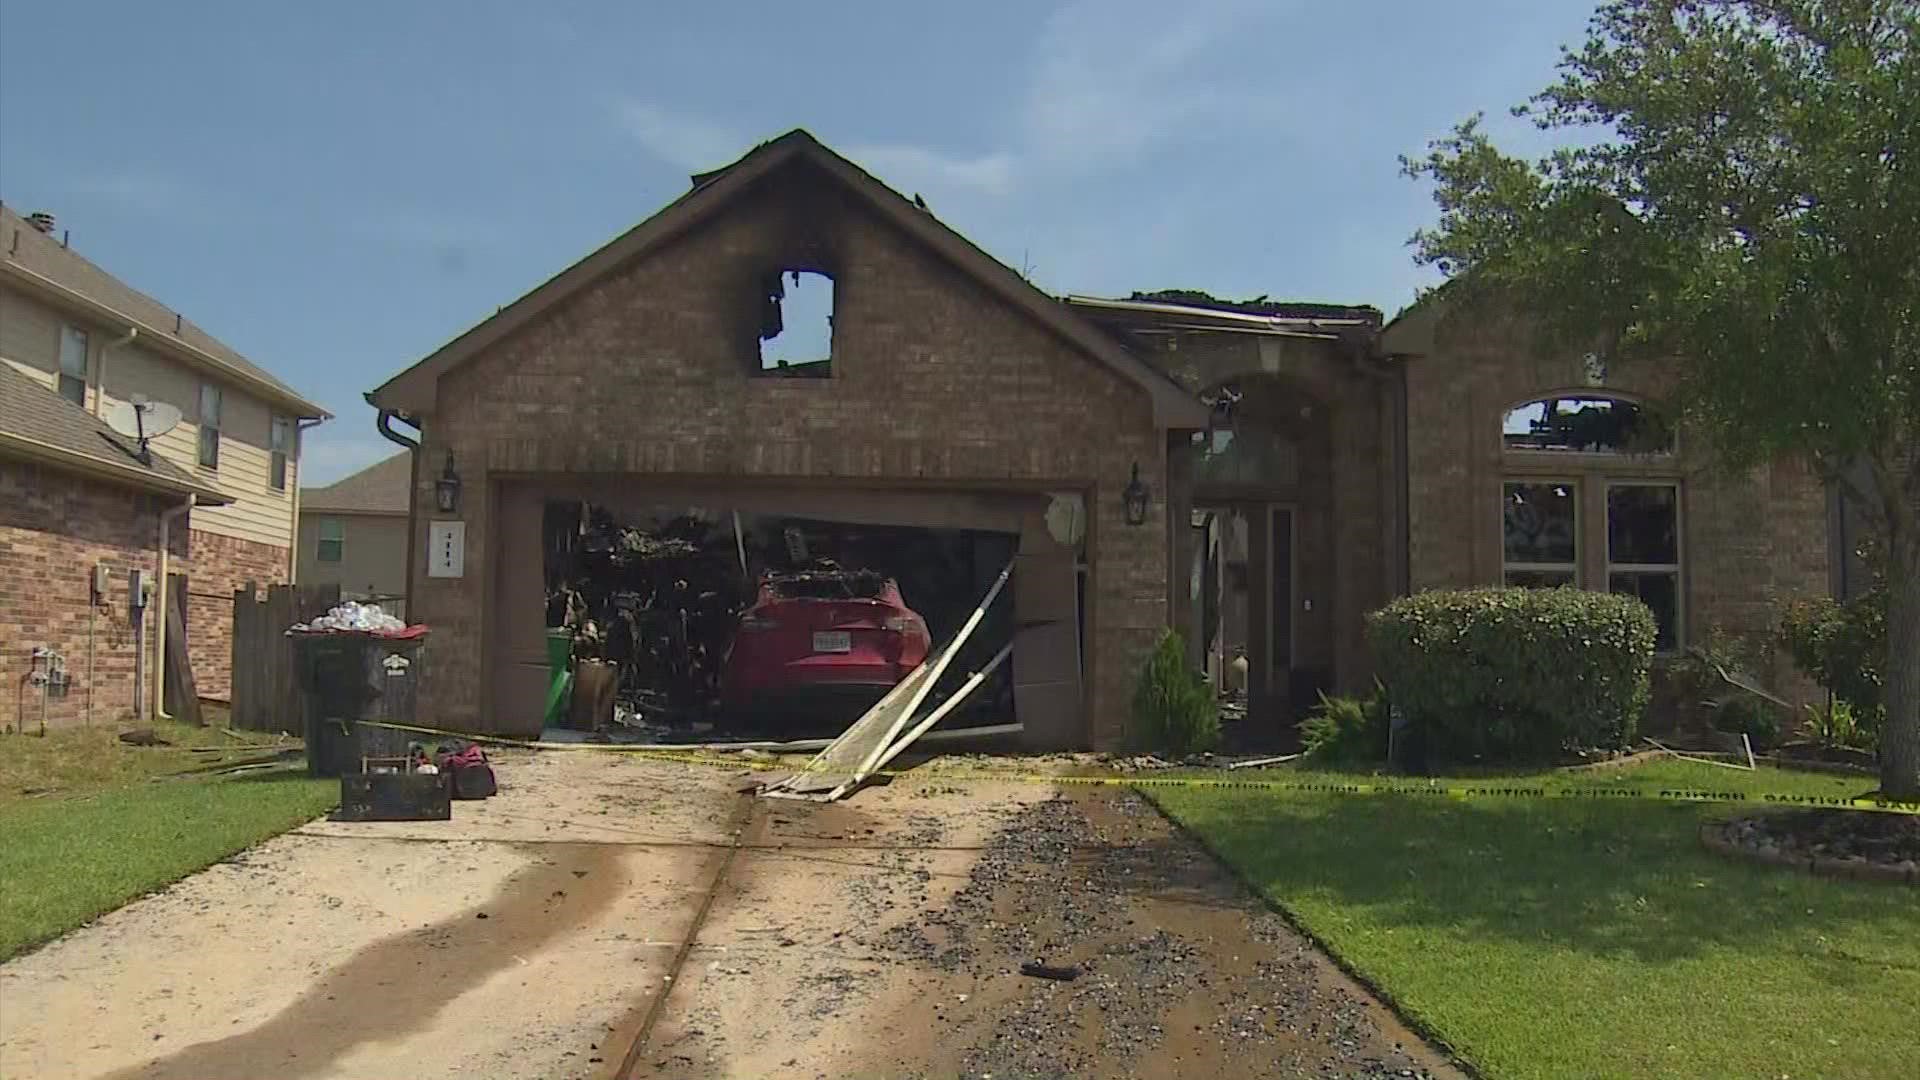 The home in Katy is one of at least two Houston area homes believed to have caught fire during Wednesday's storms.